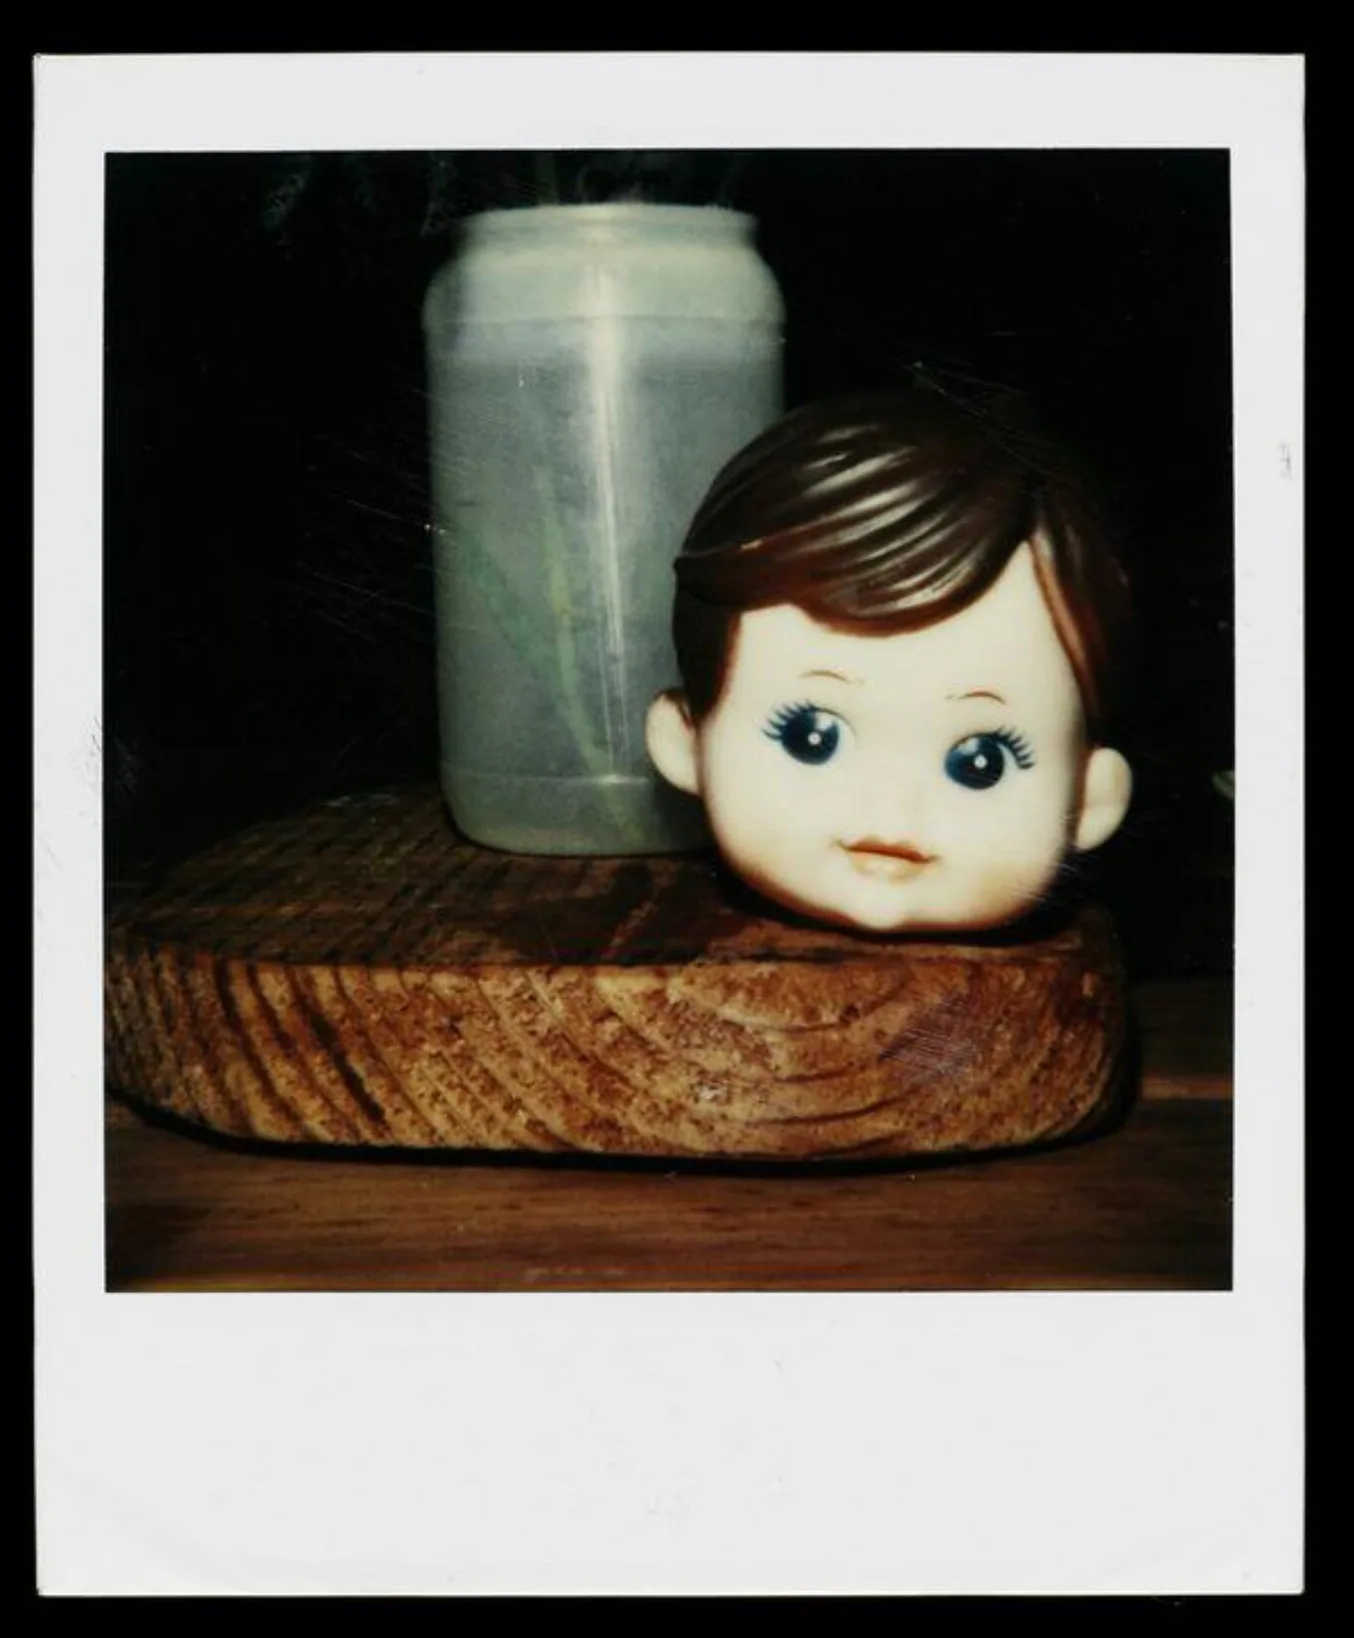 Polaroid photo depicting a dolls head next to a plastic container